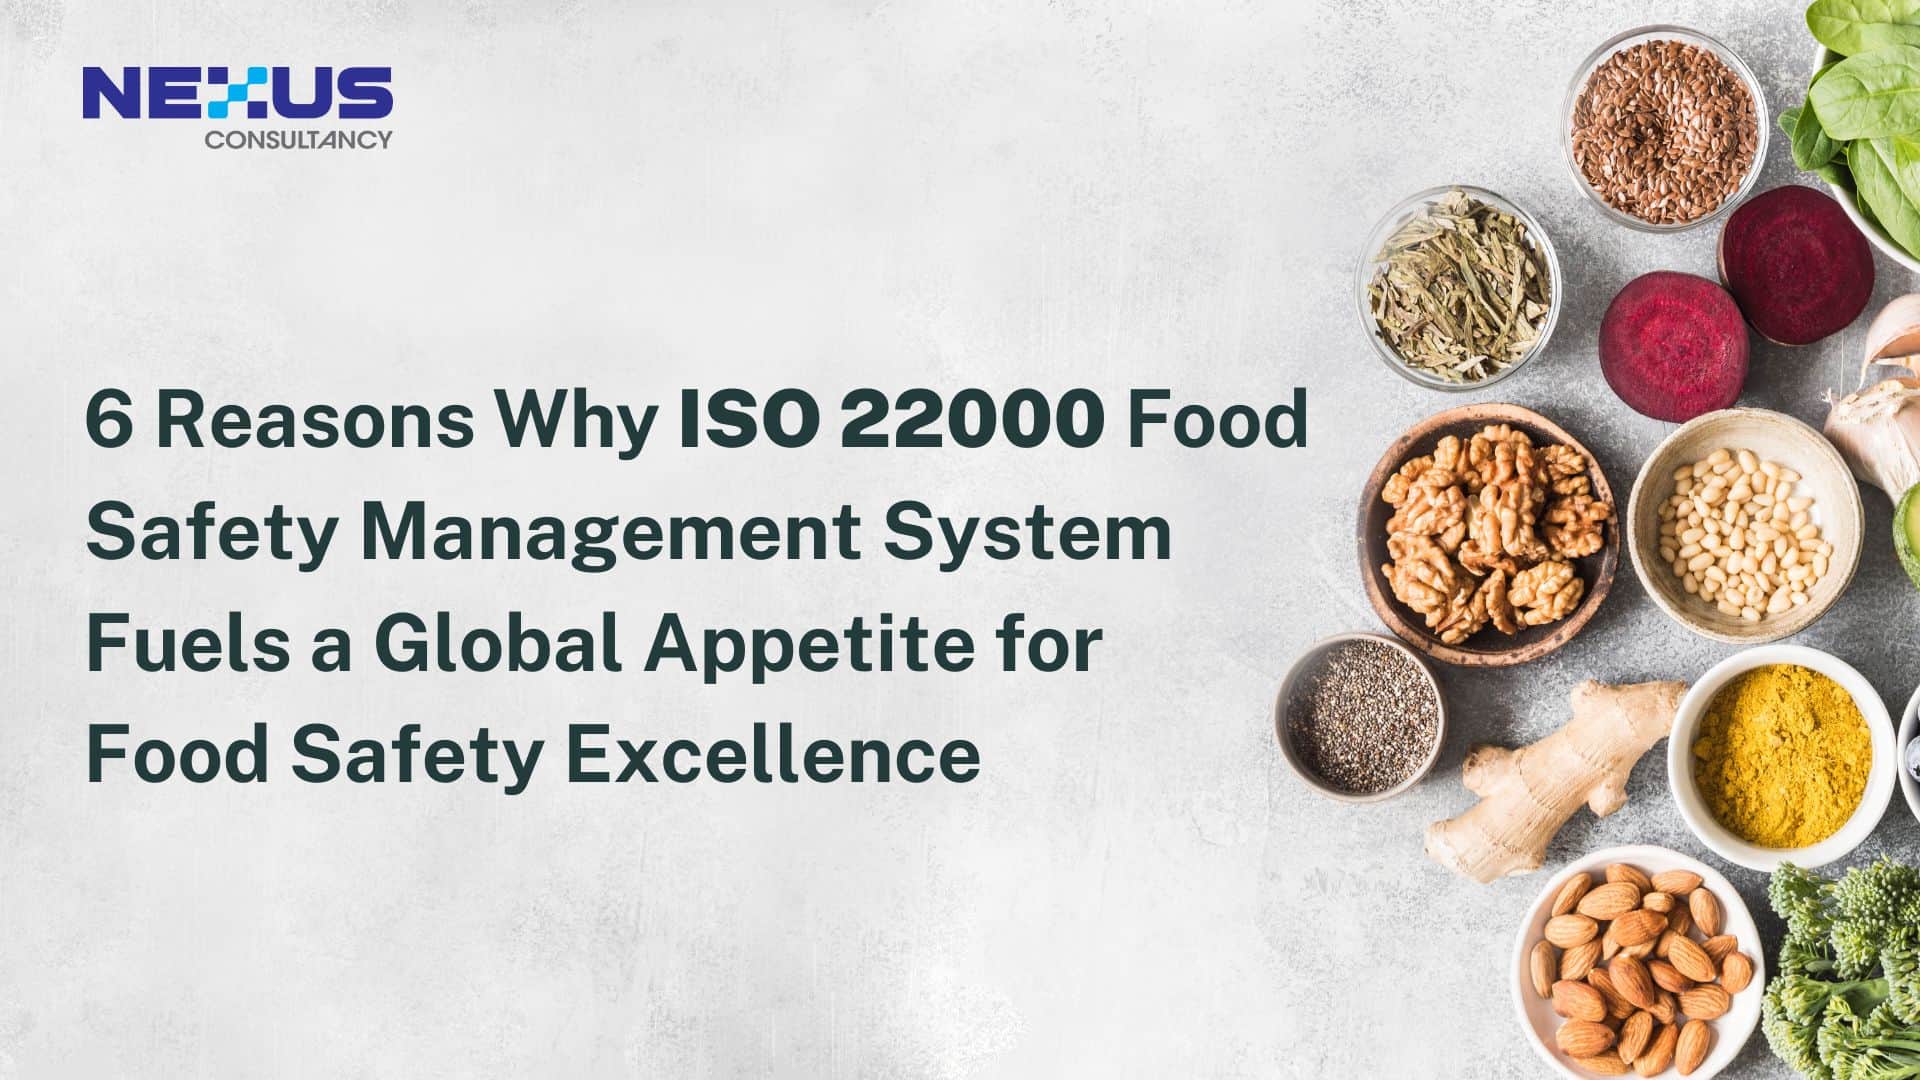 6 Reasons Why ISO 22000 Food Safety Management System Fuels a Global Appetite for Food Safety Excellence,Consistency and Harmonization,Comprehensive Risk-Based Approach,Integration and Compatibility,Legal and Regulatory Compliance,Consumer Confidence and Competitive Advantage,Continuous Improvement and Performance Enhancement